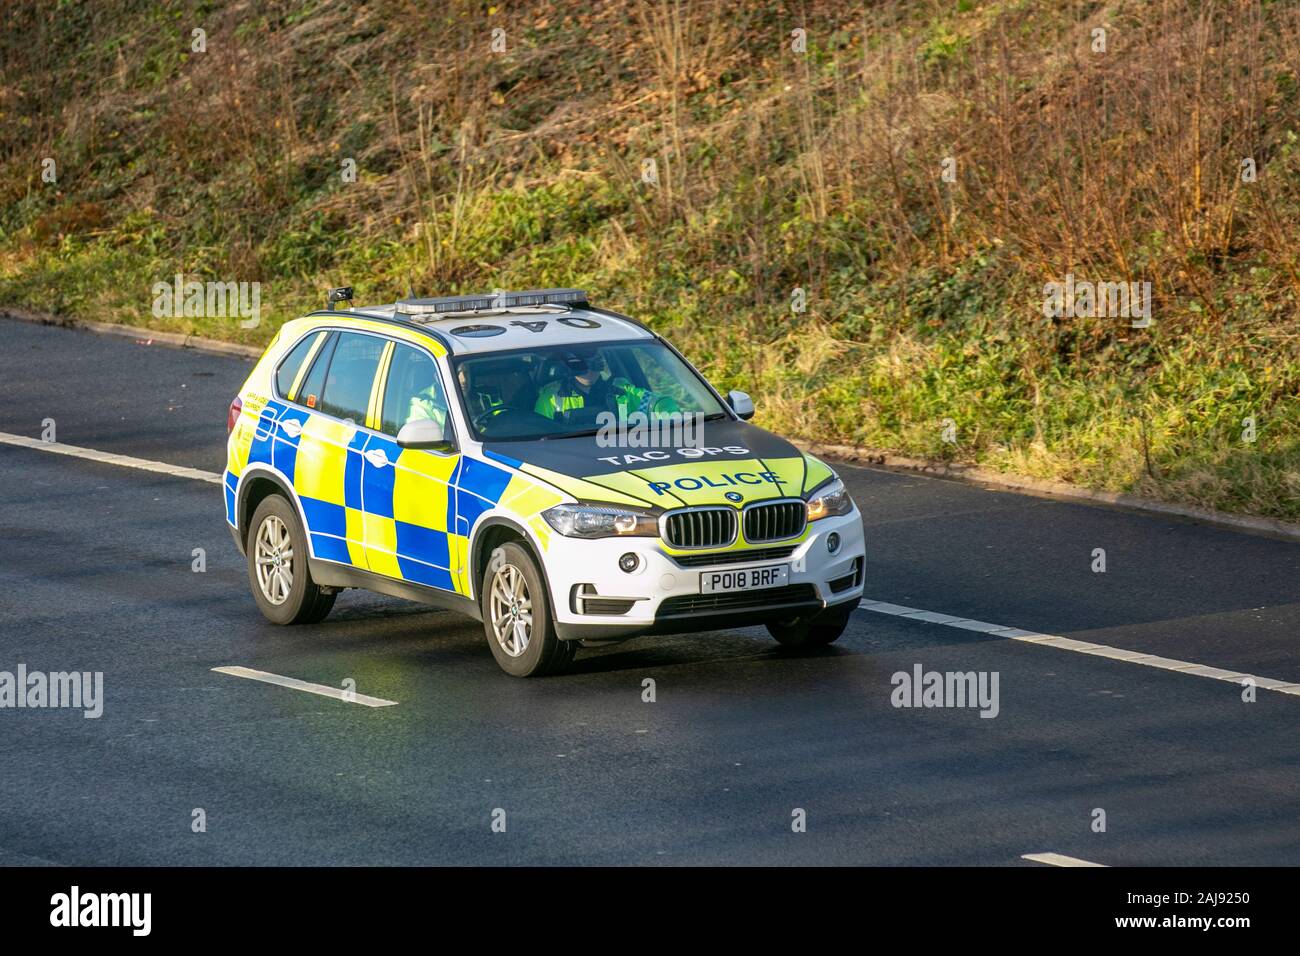 Tac ops, BMW X5 Xdrive30D AC Auto Police car.  Lancashire Tactical Operations division. UK Police Vehicular traffic, transport, modern, BMW saloon cars, east bound on the 3 lane M55 motorway highway. Stock Photo